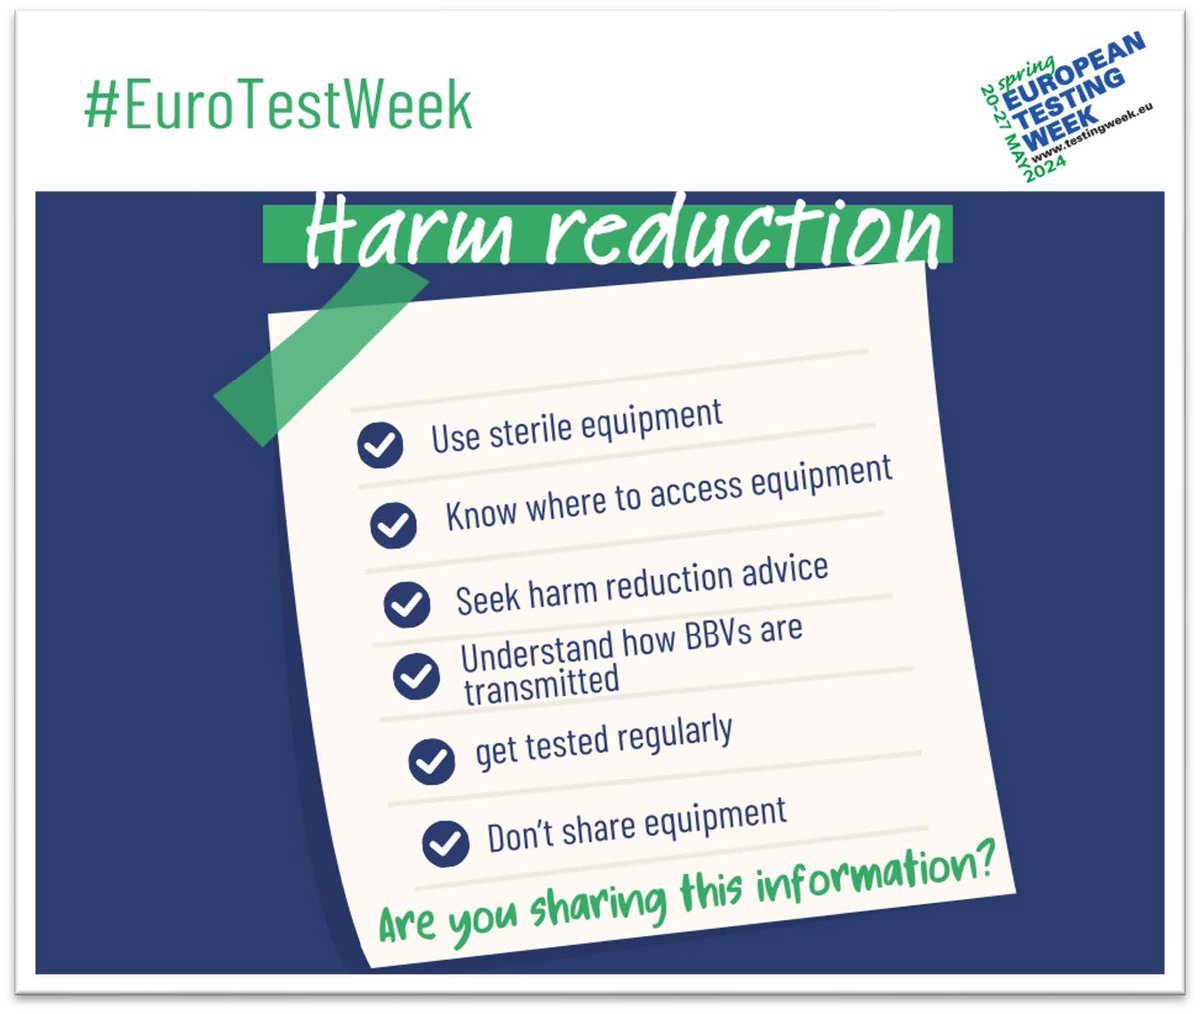 Simple steps to prevent Hepatitis C 💙 Ensuring access to #HepC testing and treatment pathways are crucial elements of harm reduction. @HepC_U_Later is working hard to find those living with #HepC to eliminate it for good 👇🏽 hepctest.nhs.uk #EuroTestWeek #HEPCULater